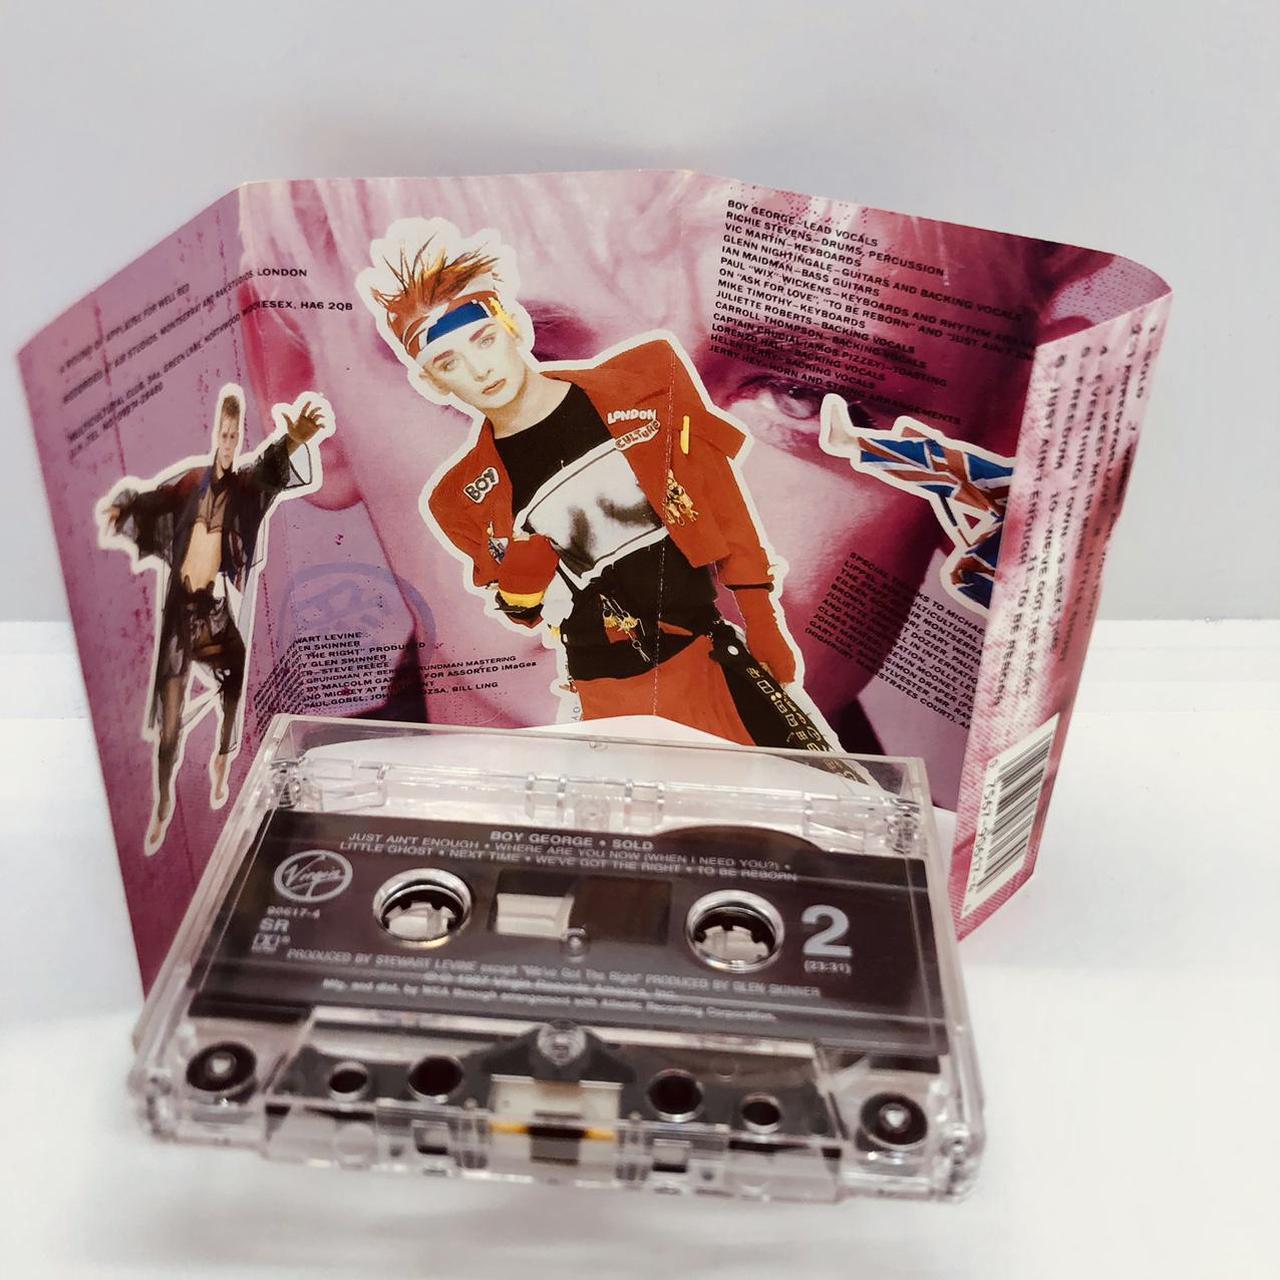 Product Image 2 - Boy George Cassette 3-Pack

1. Solo,